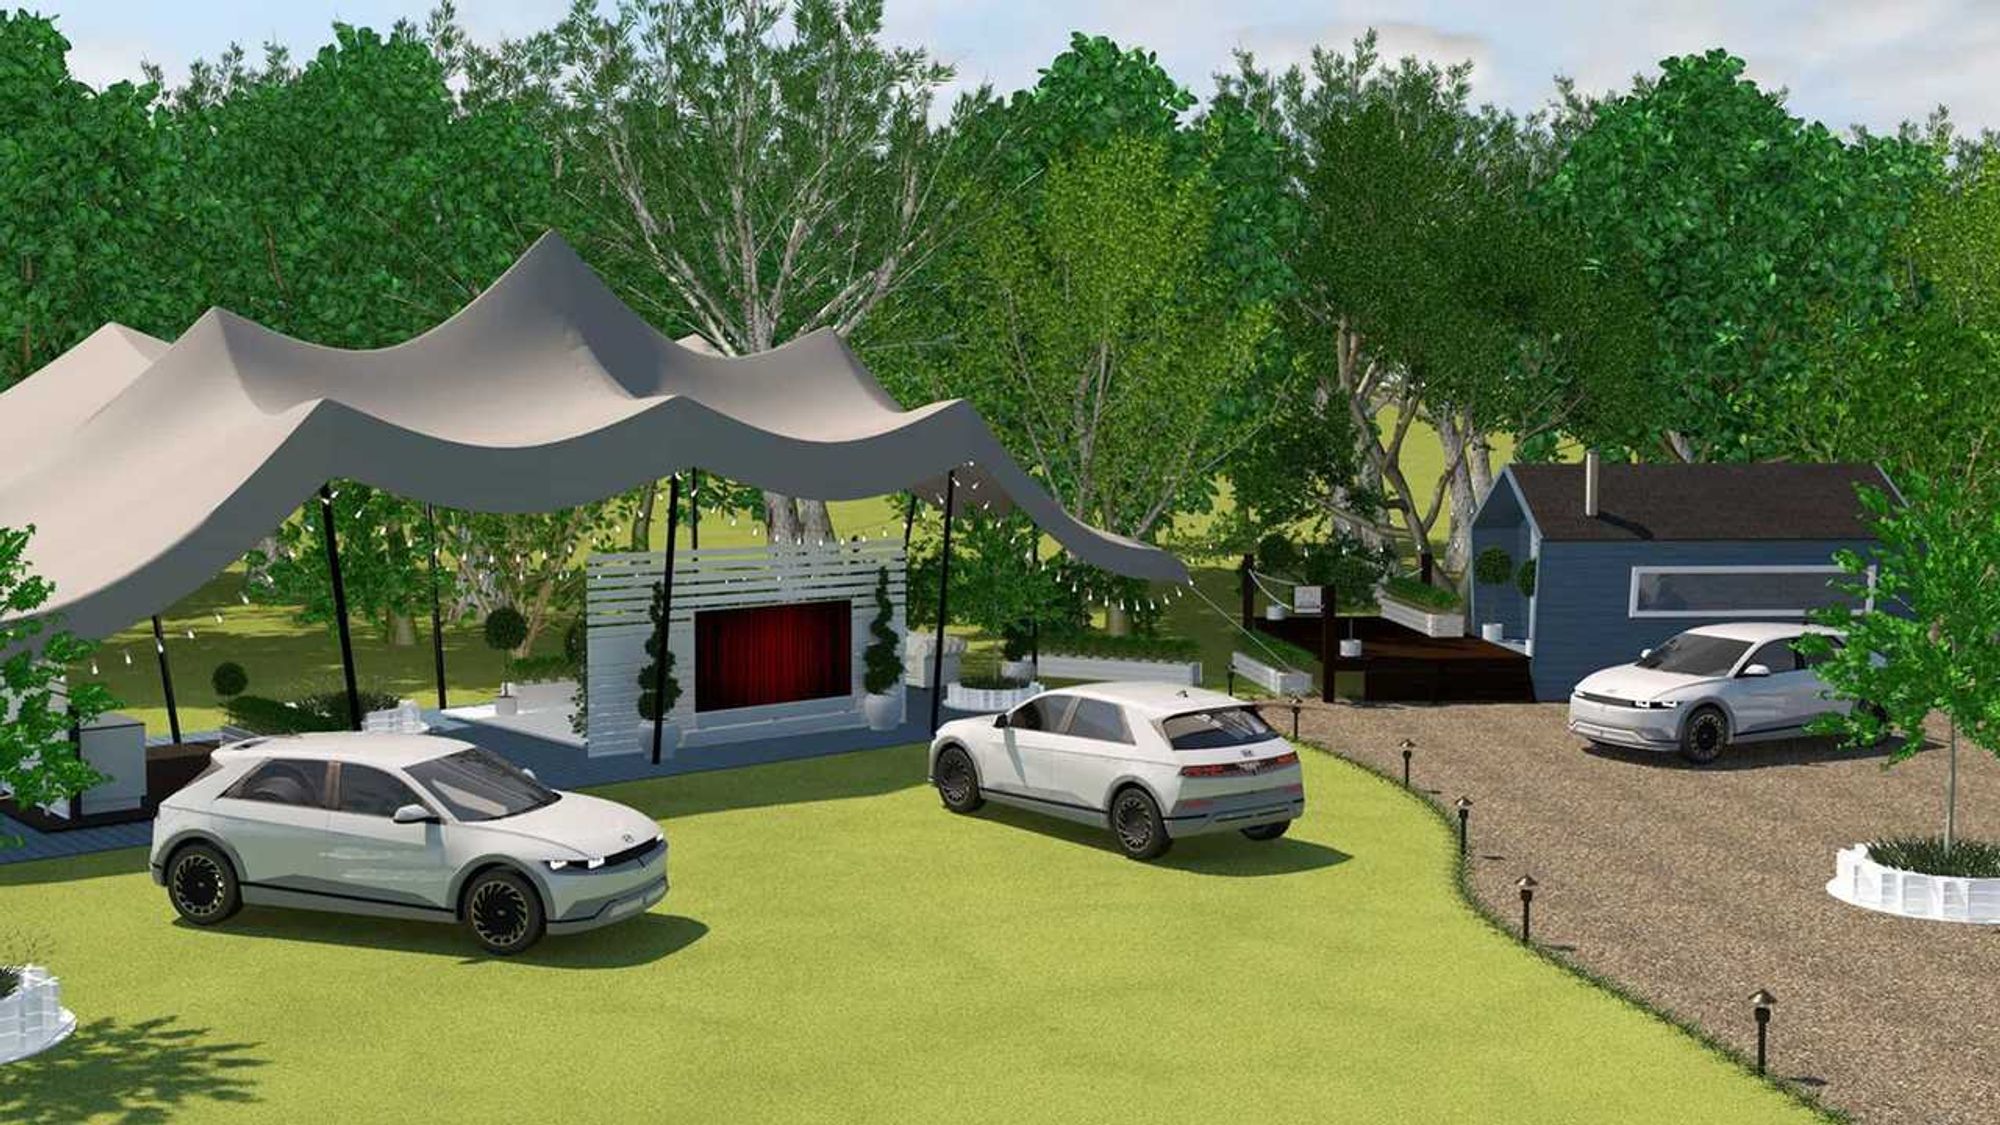 Hyundai Set To Open Hotel Powered Exclusively By EVs